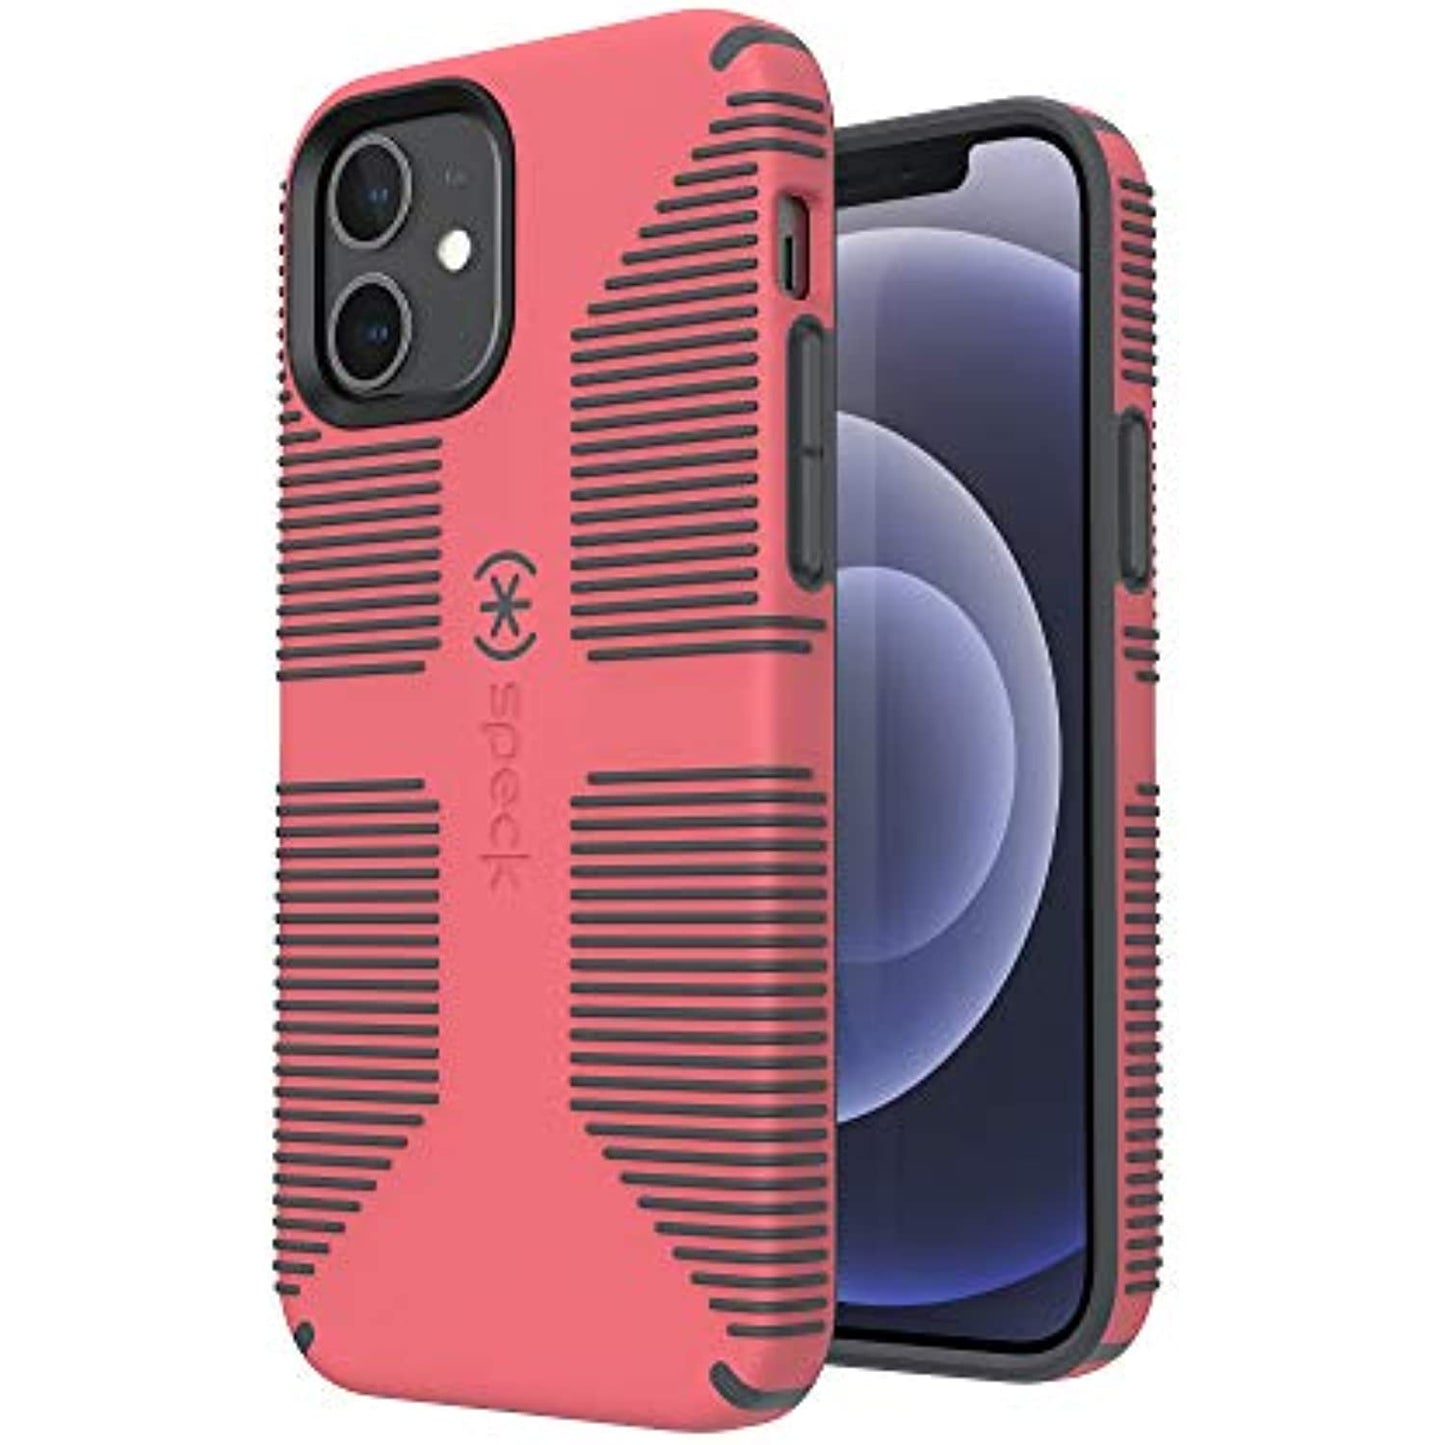 Speck Products CandyShell Pro Grip iPhone 12, iPhone 12 Pro Case, Raspberry Kiss Red/Slate Grey (137602-9240)